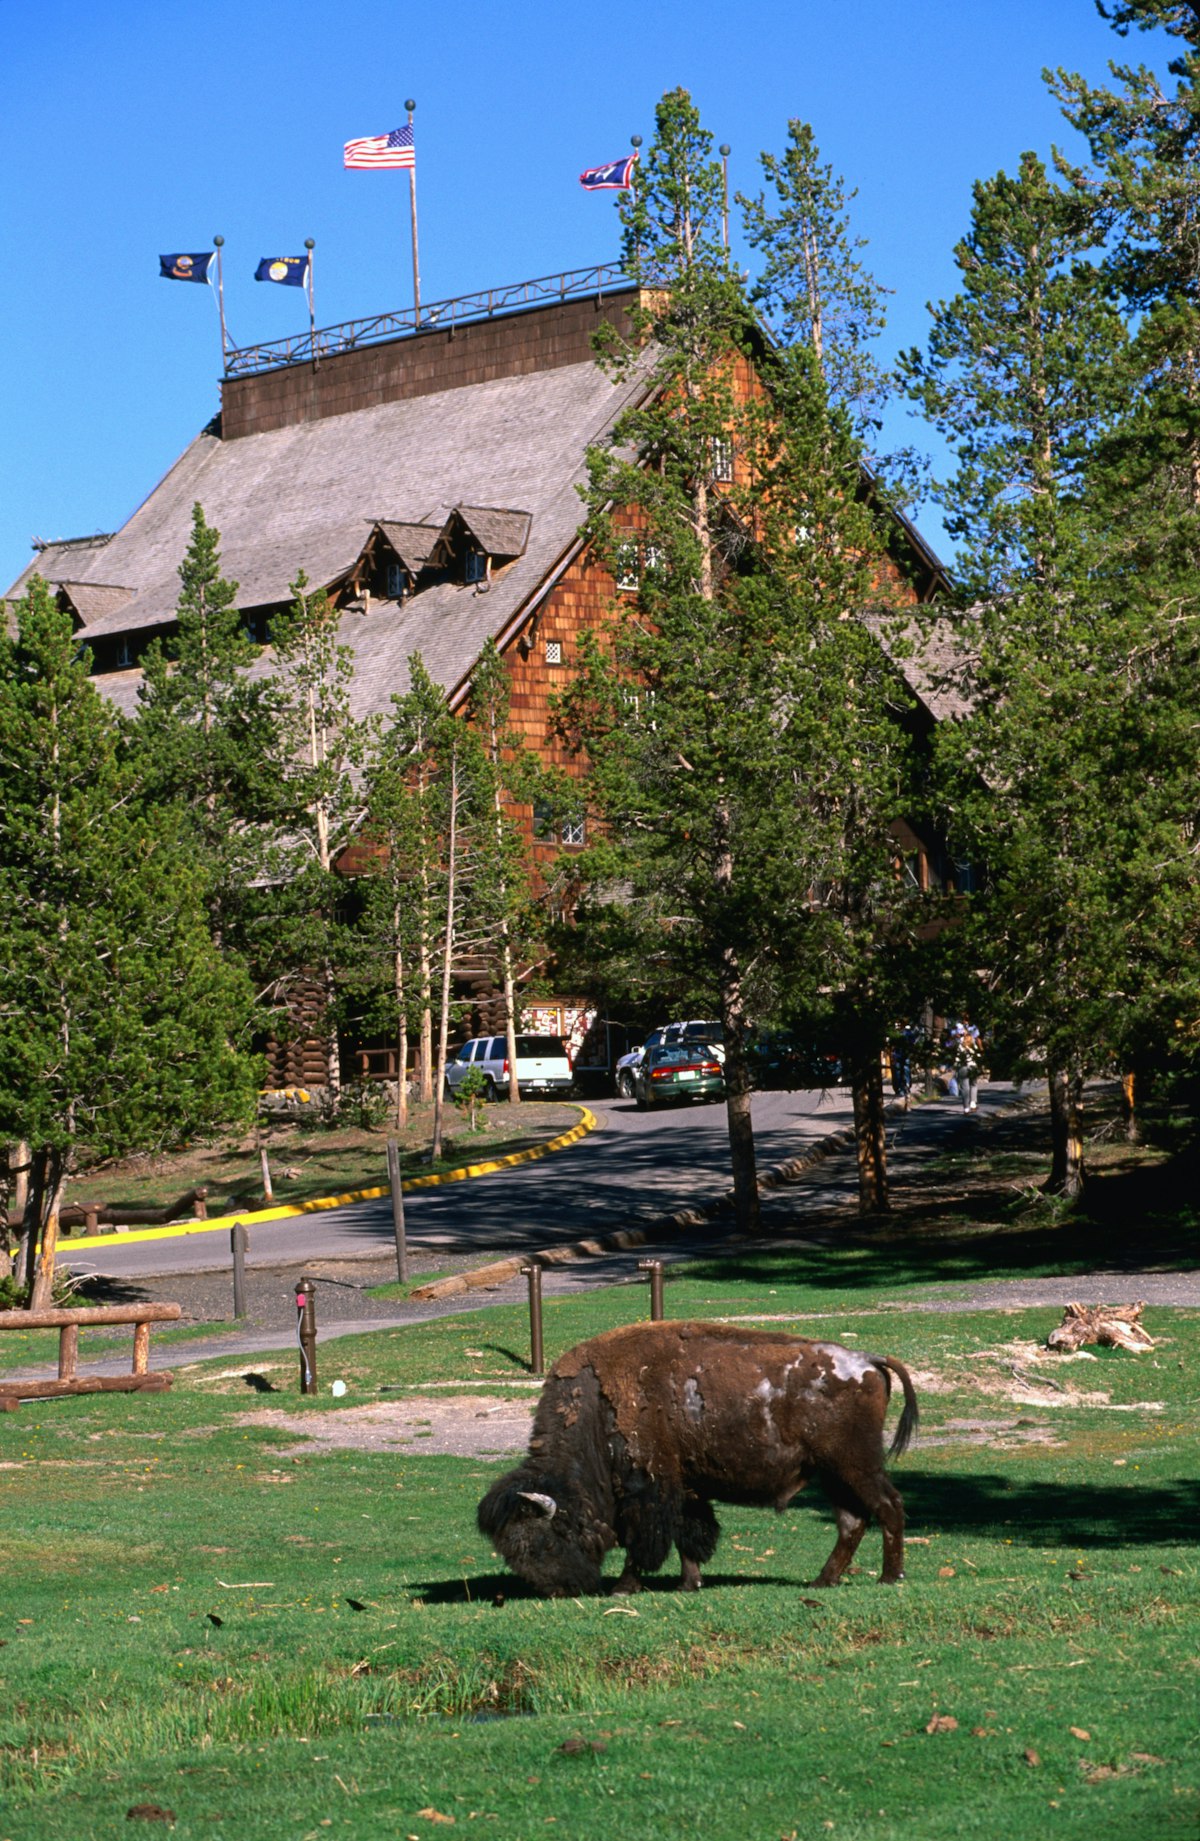 Bison grazing near the entrance to the Old Faithful Inn in Yellowstone.